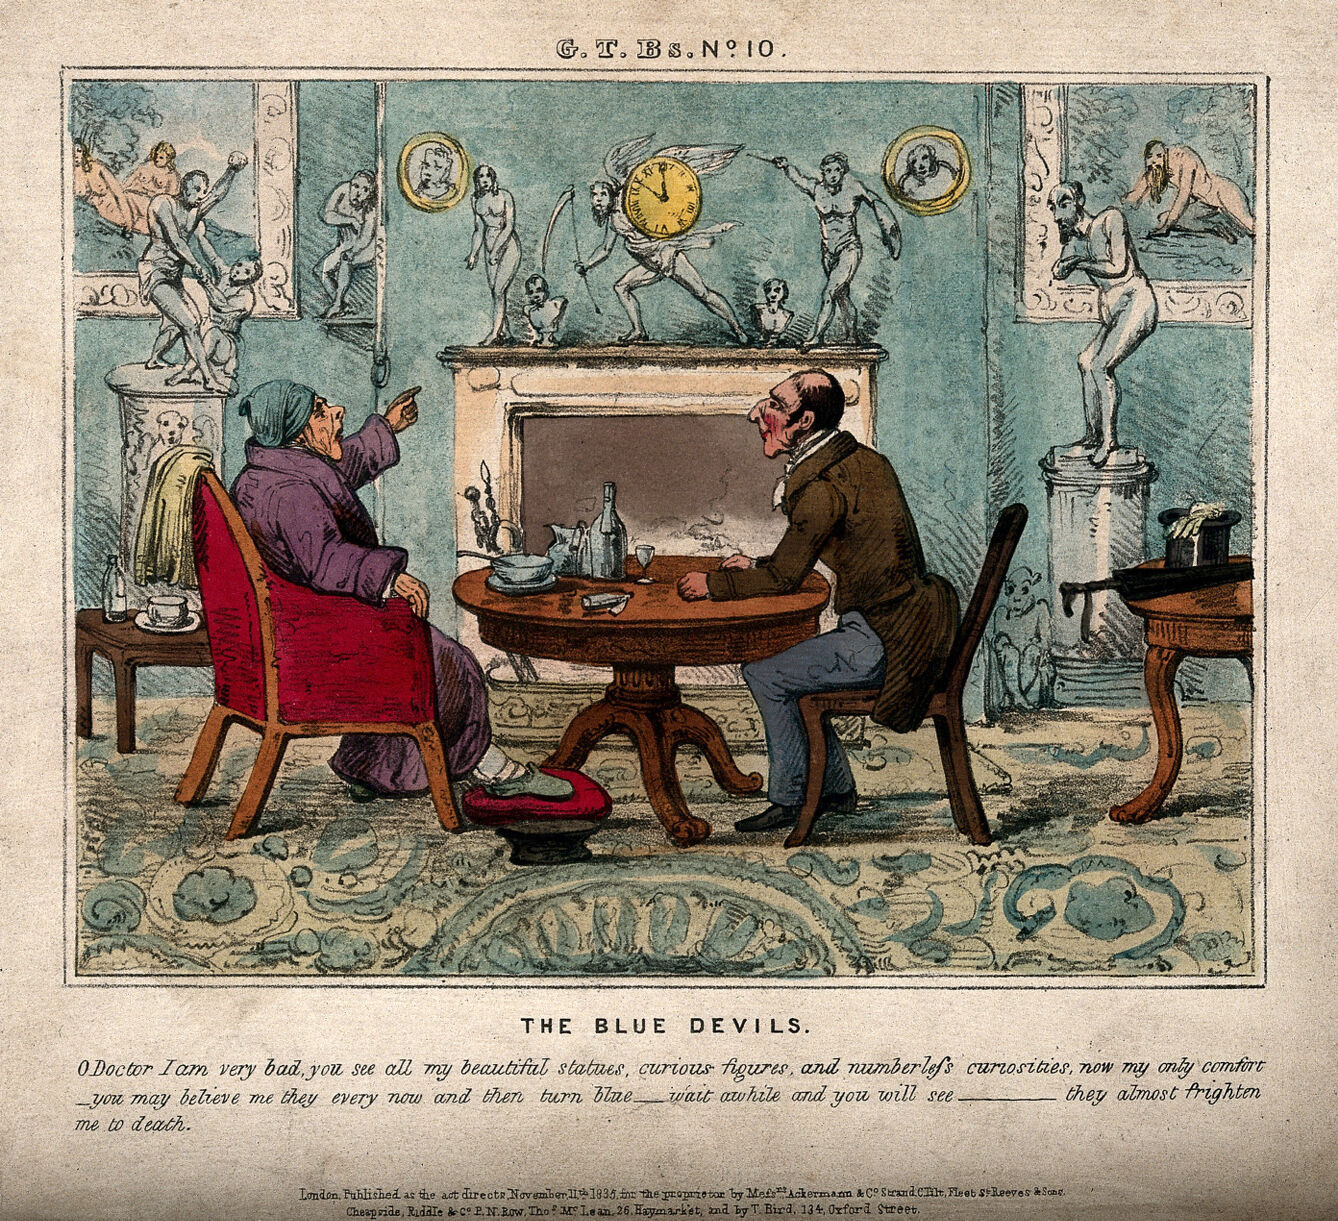 Credit: A gouty man surrounded by his collection of artefacts, telling his doctor how they keep turning blue; suggesting the man's melancholic loneliness. Coloured lithograph, 1835. Wellcome Collection. Source: Wellcome Collection.